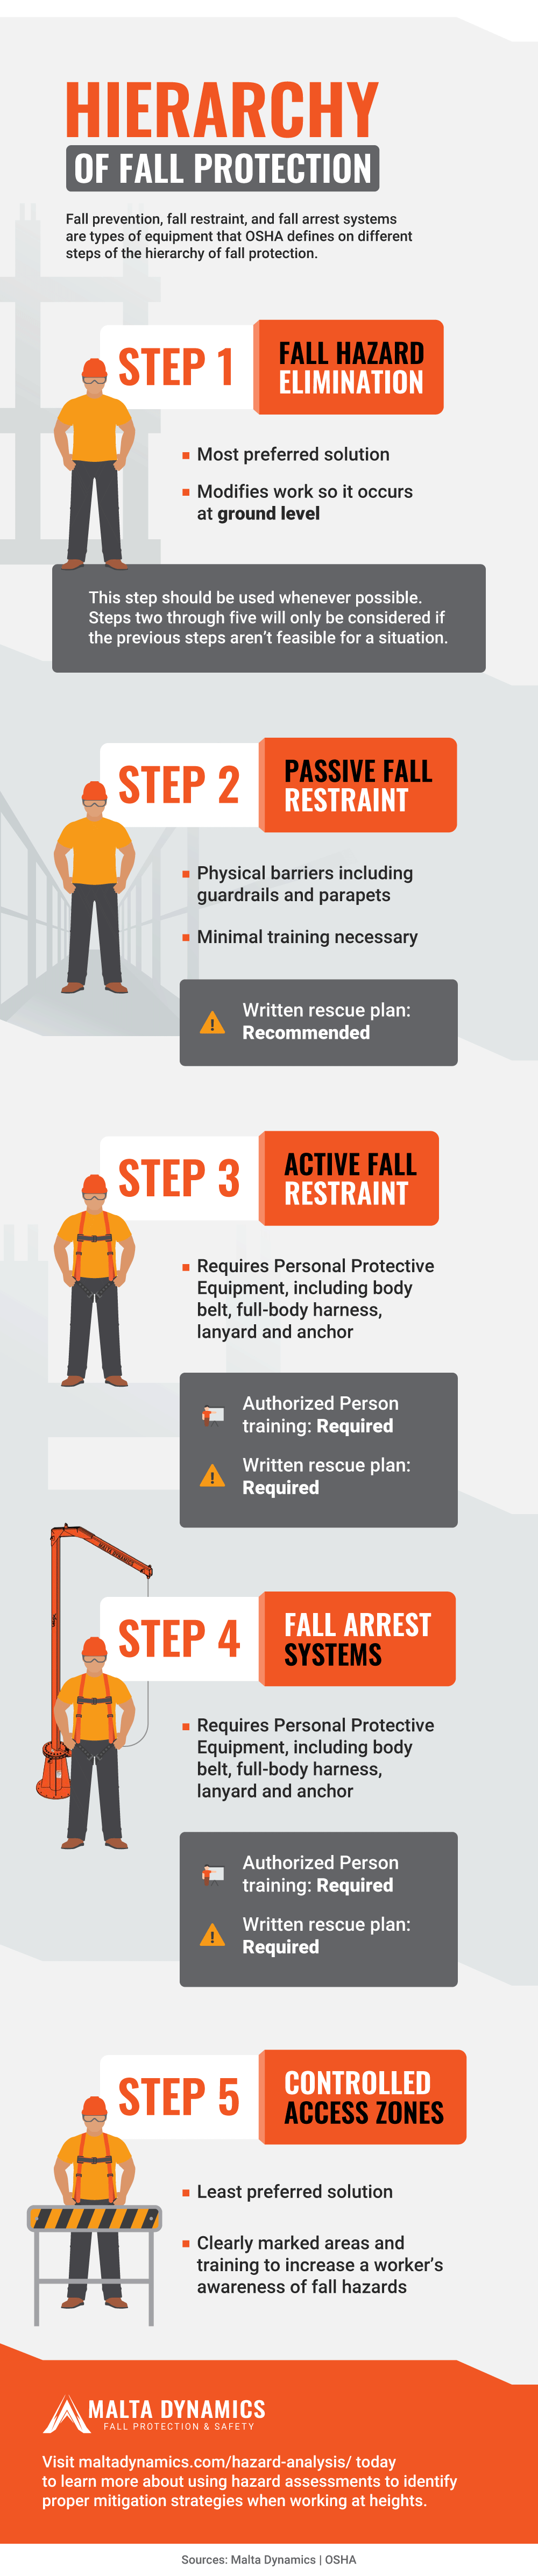 MG Hierarchy of Fall Protection